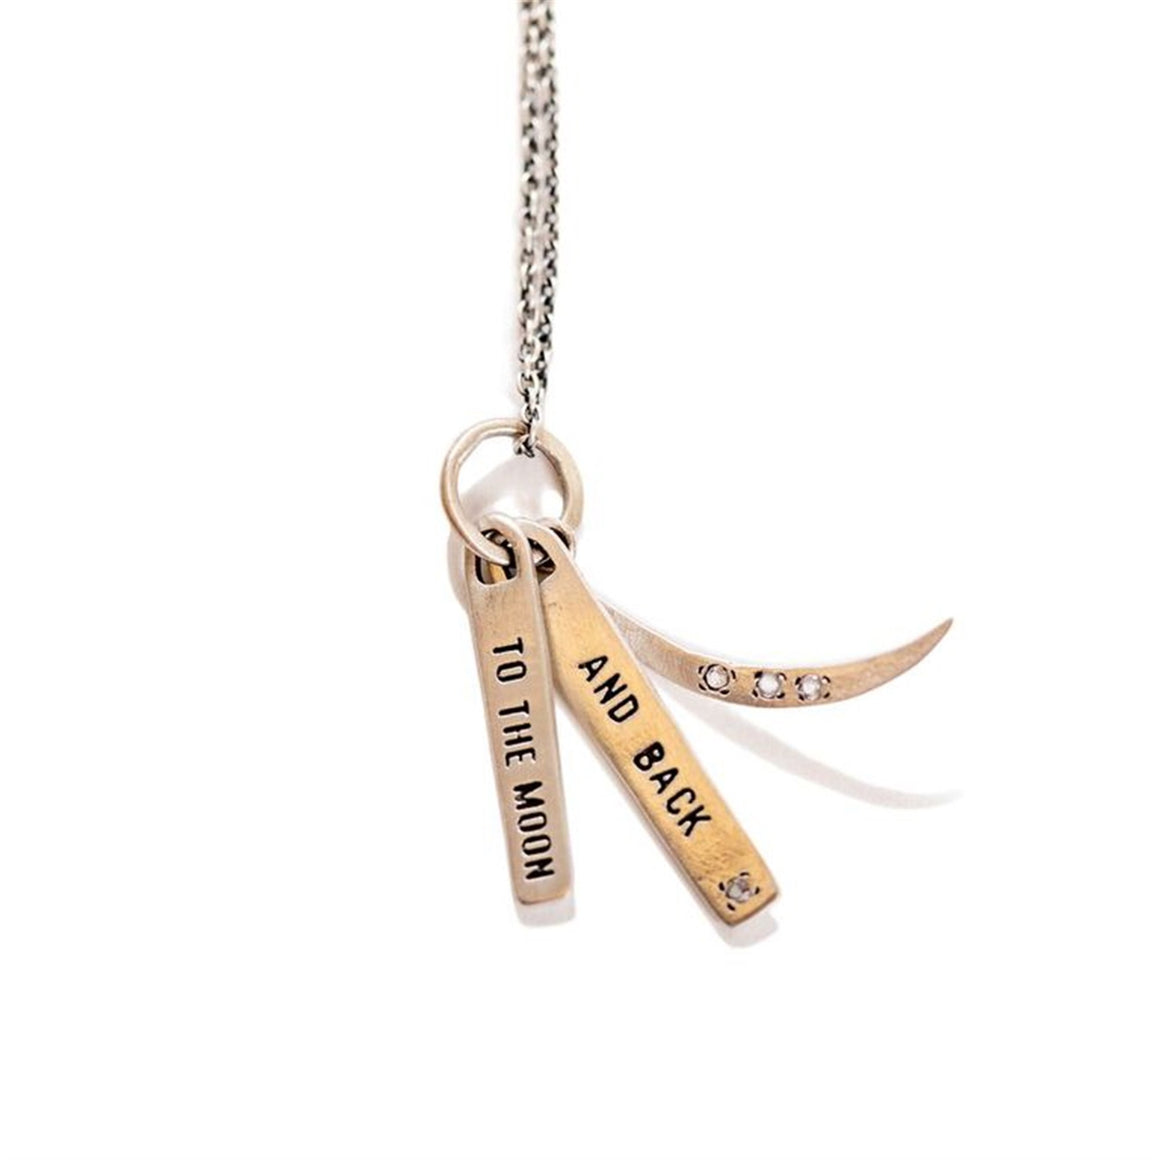 To The Moon And Back Necklace - 16" + 2" extender